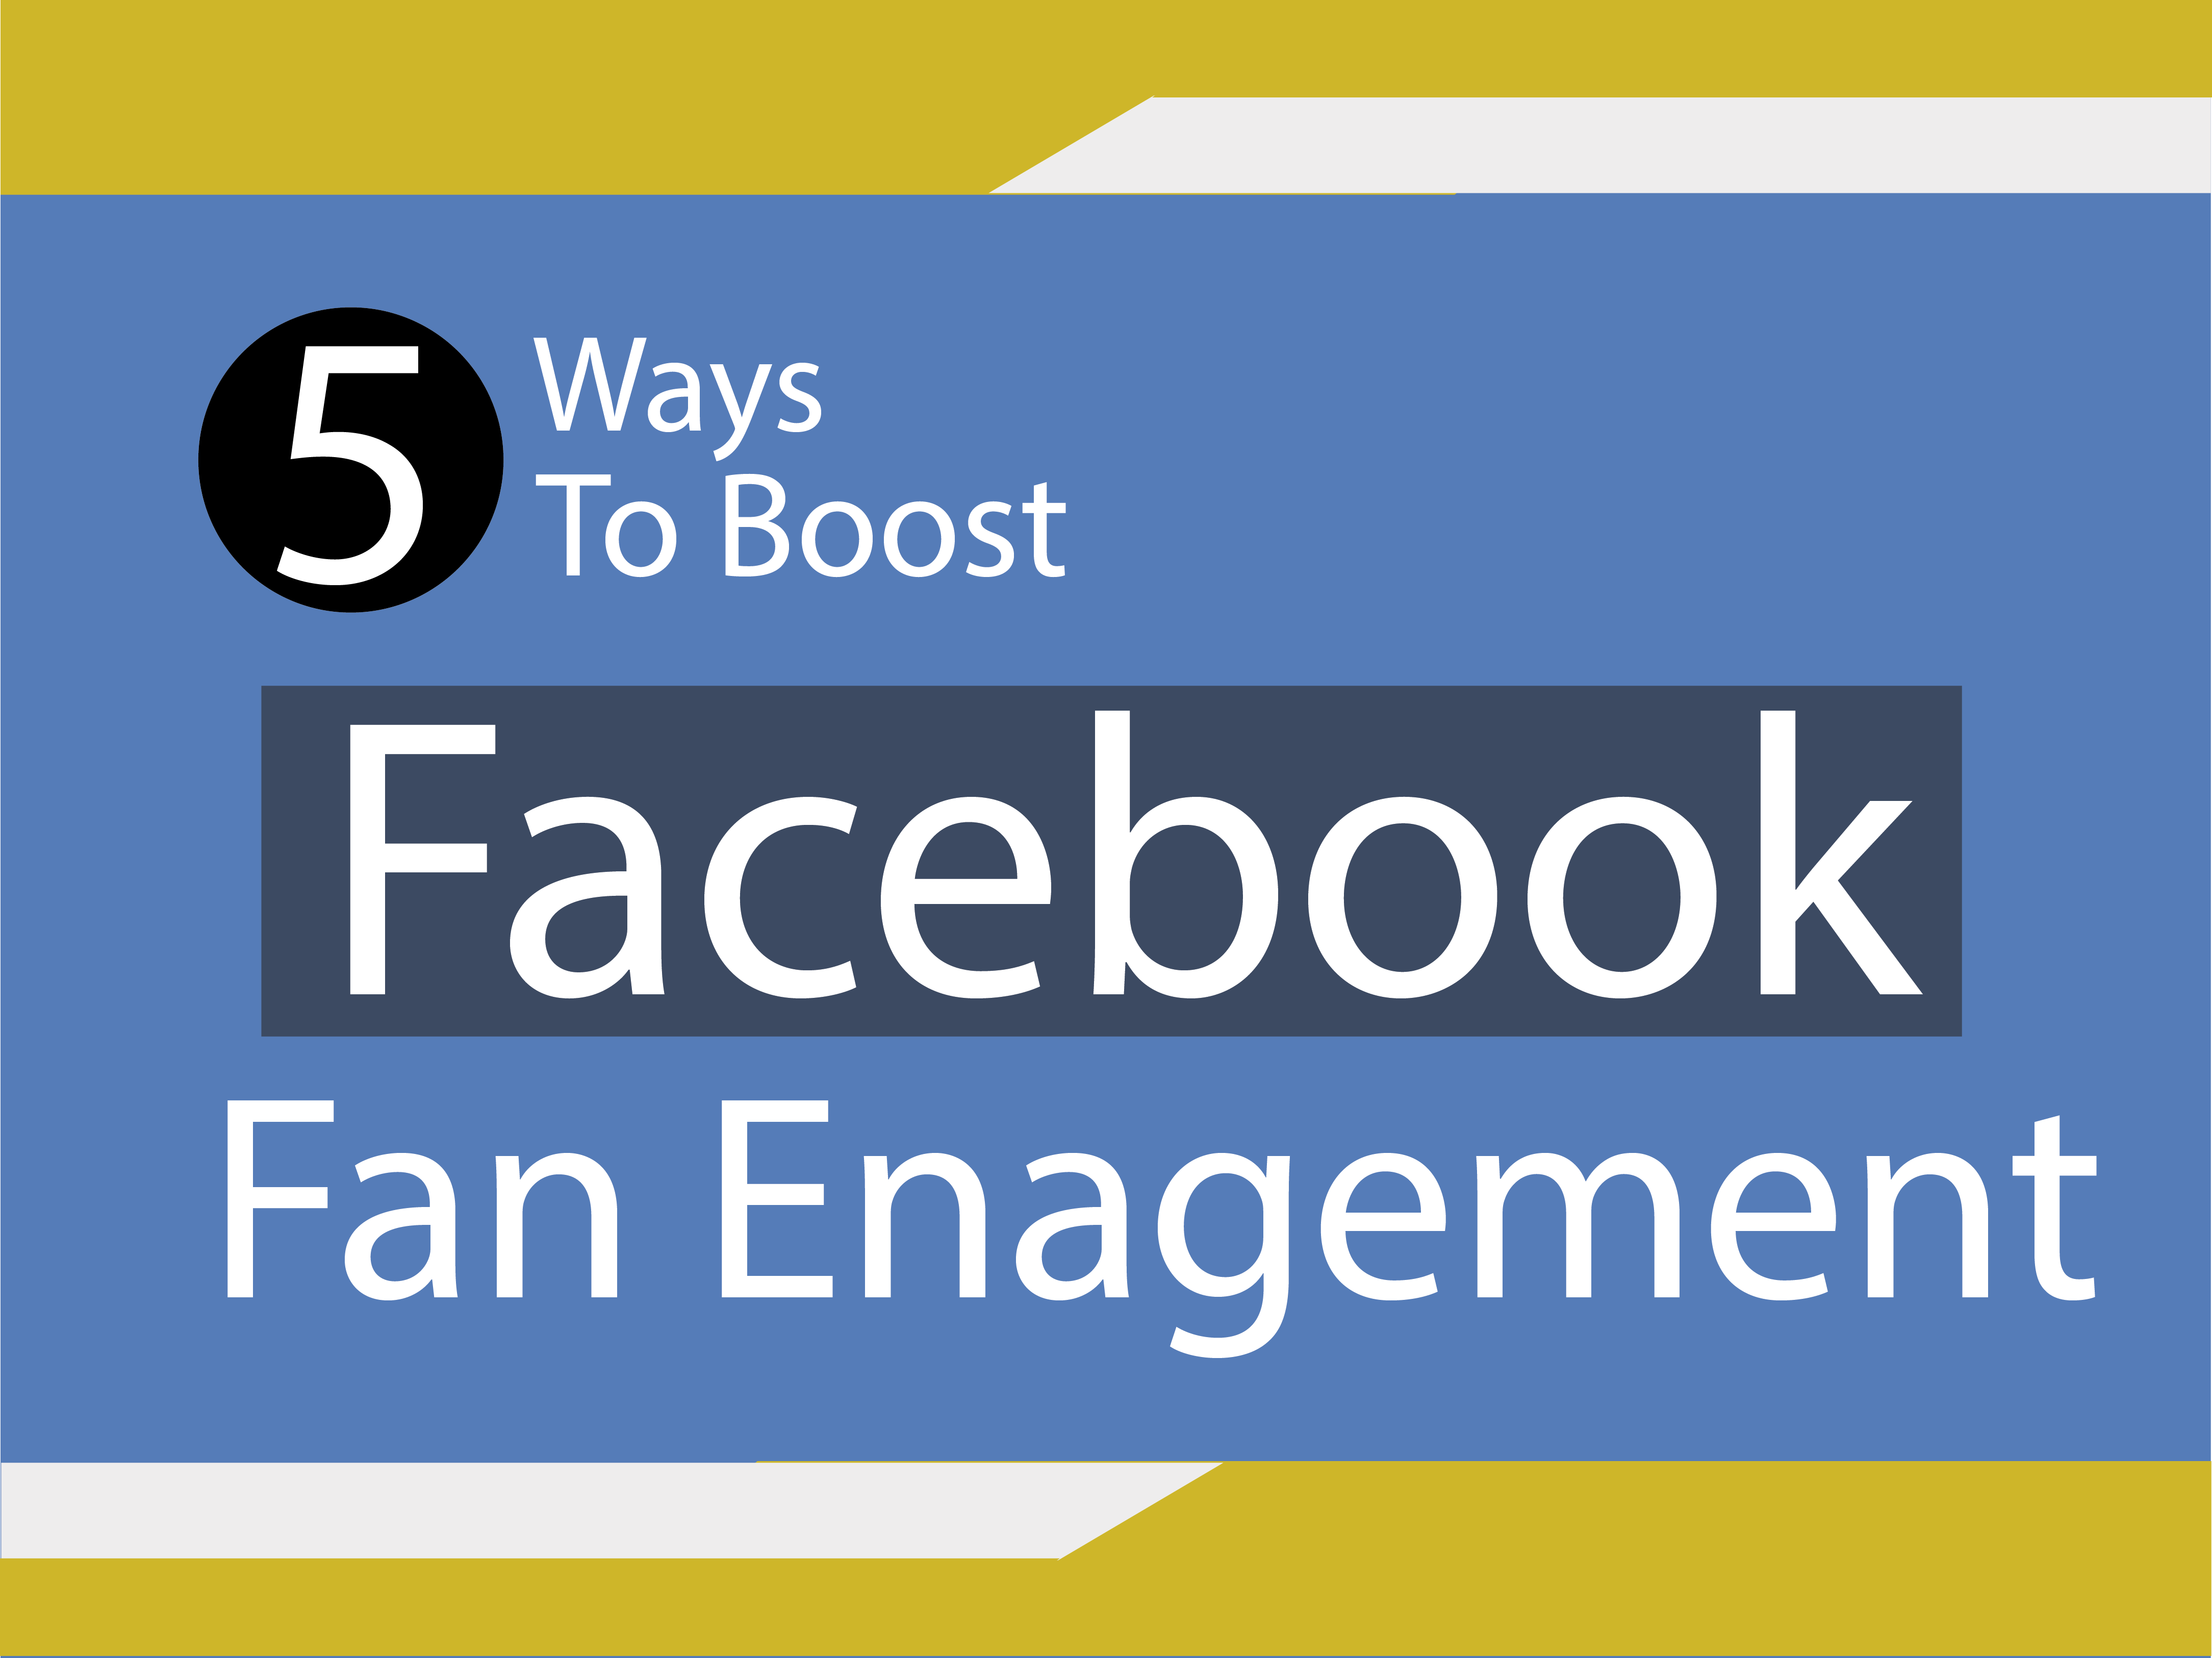 5 Ways to Boost Facebook Fan Engagement!